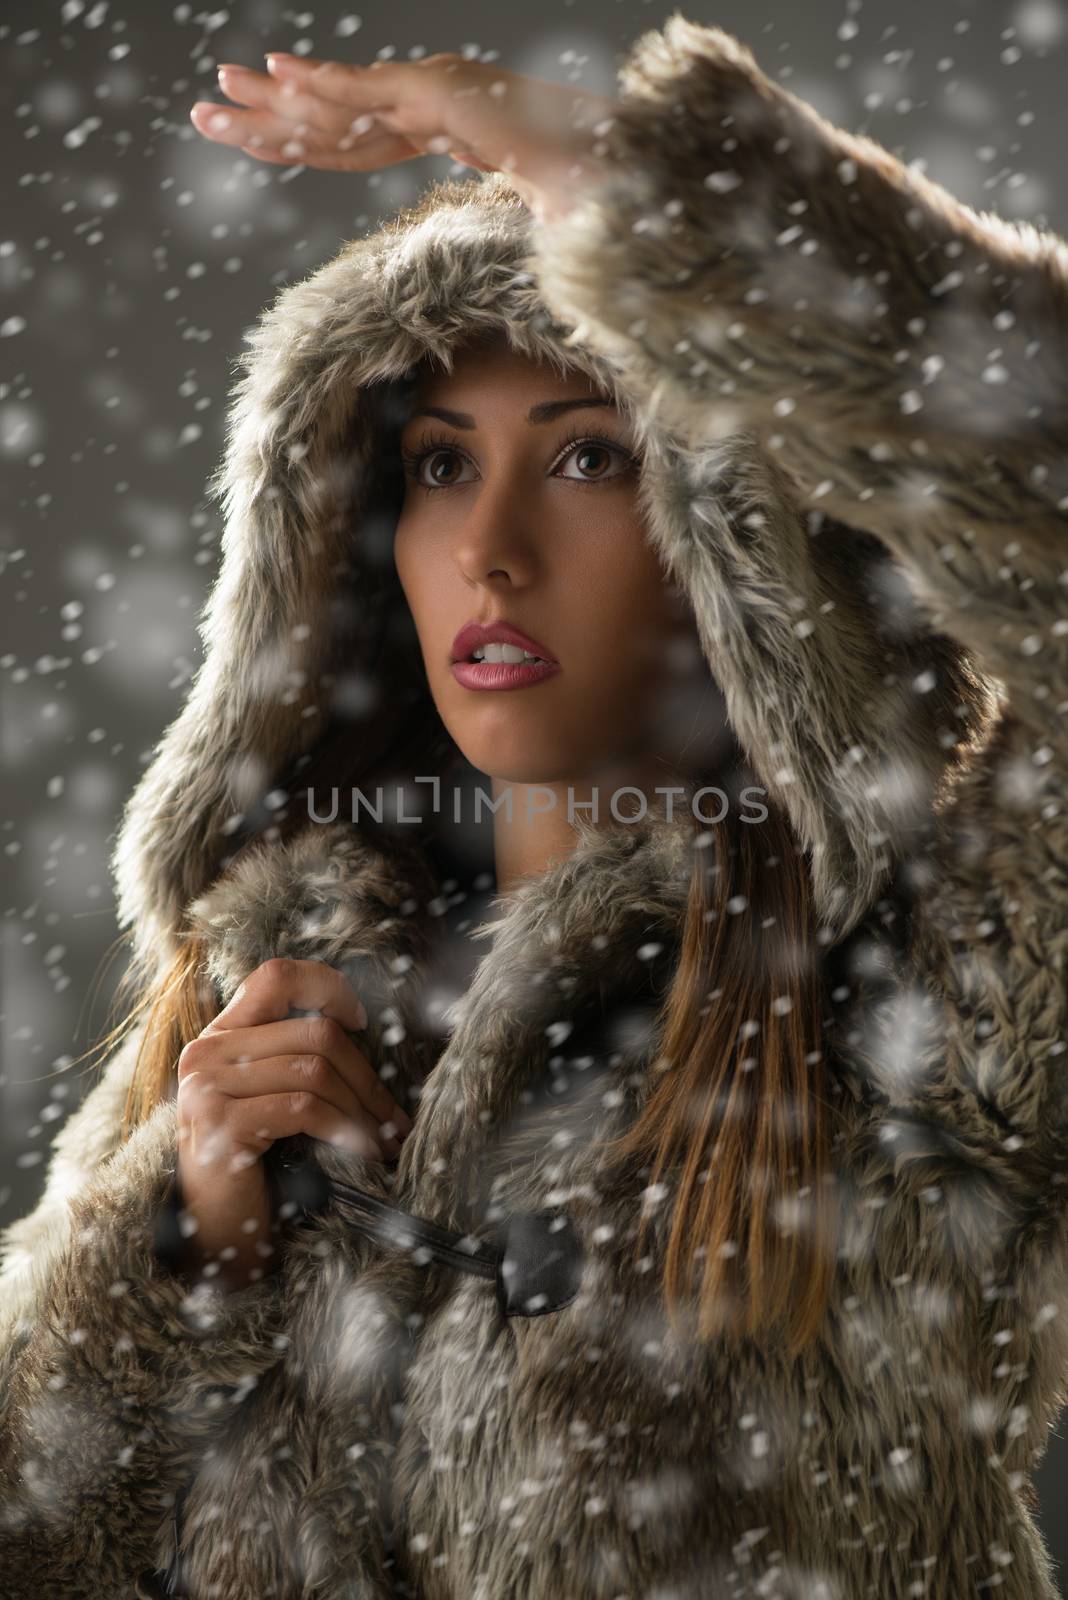 Girl Finding Her Way Through Blizzard by MilanMarkovic78